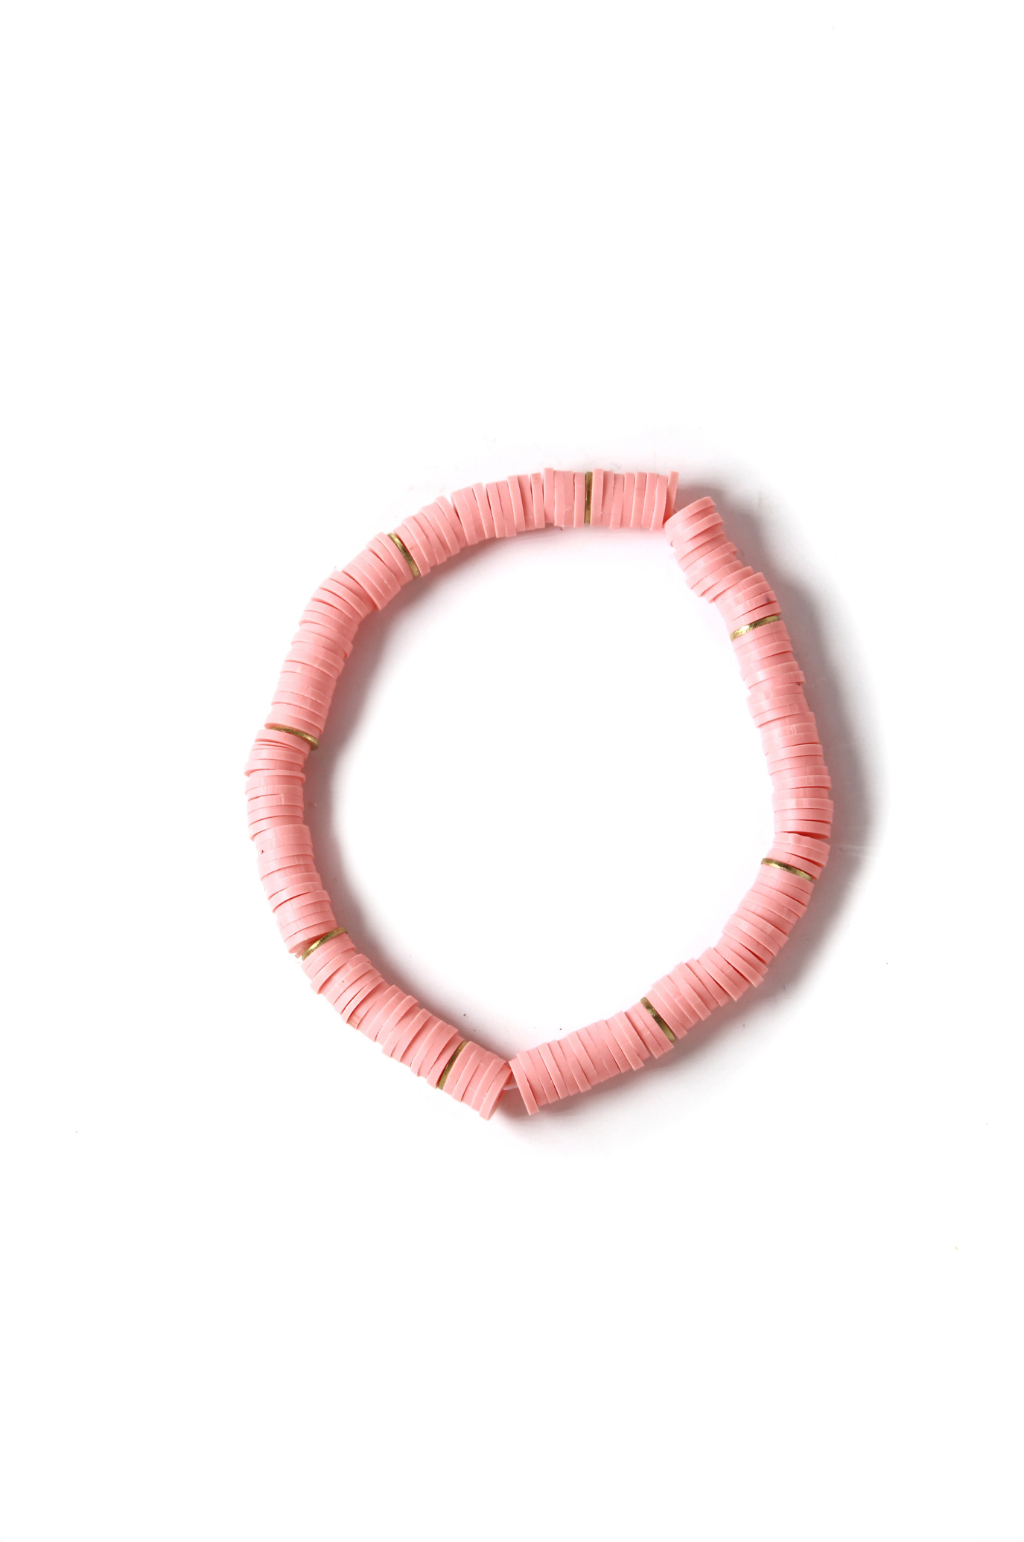 Monica Polymer Clay Bead Bracelets Plain by Annie Claire Designs (Singles) 21-Flamingo Pink